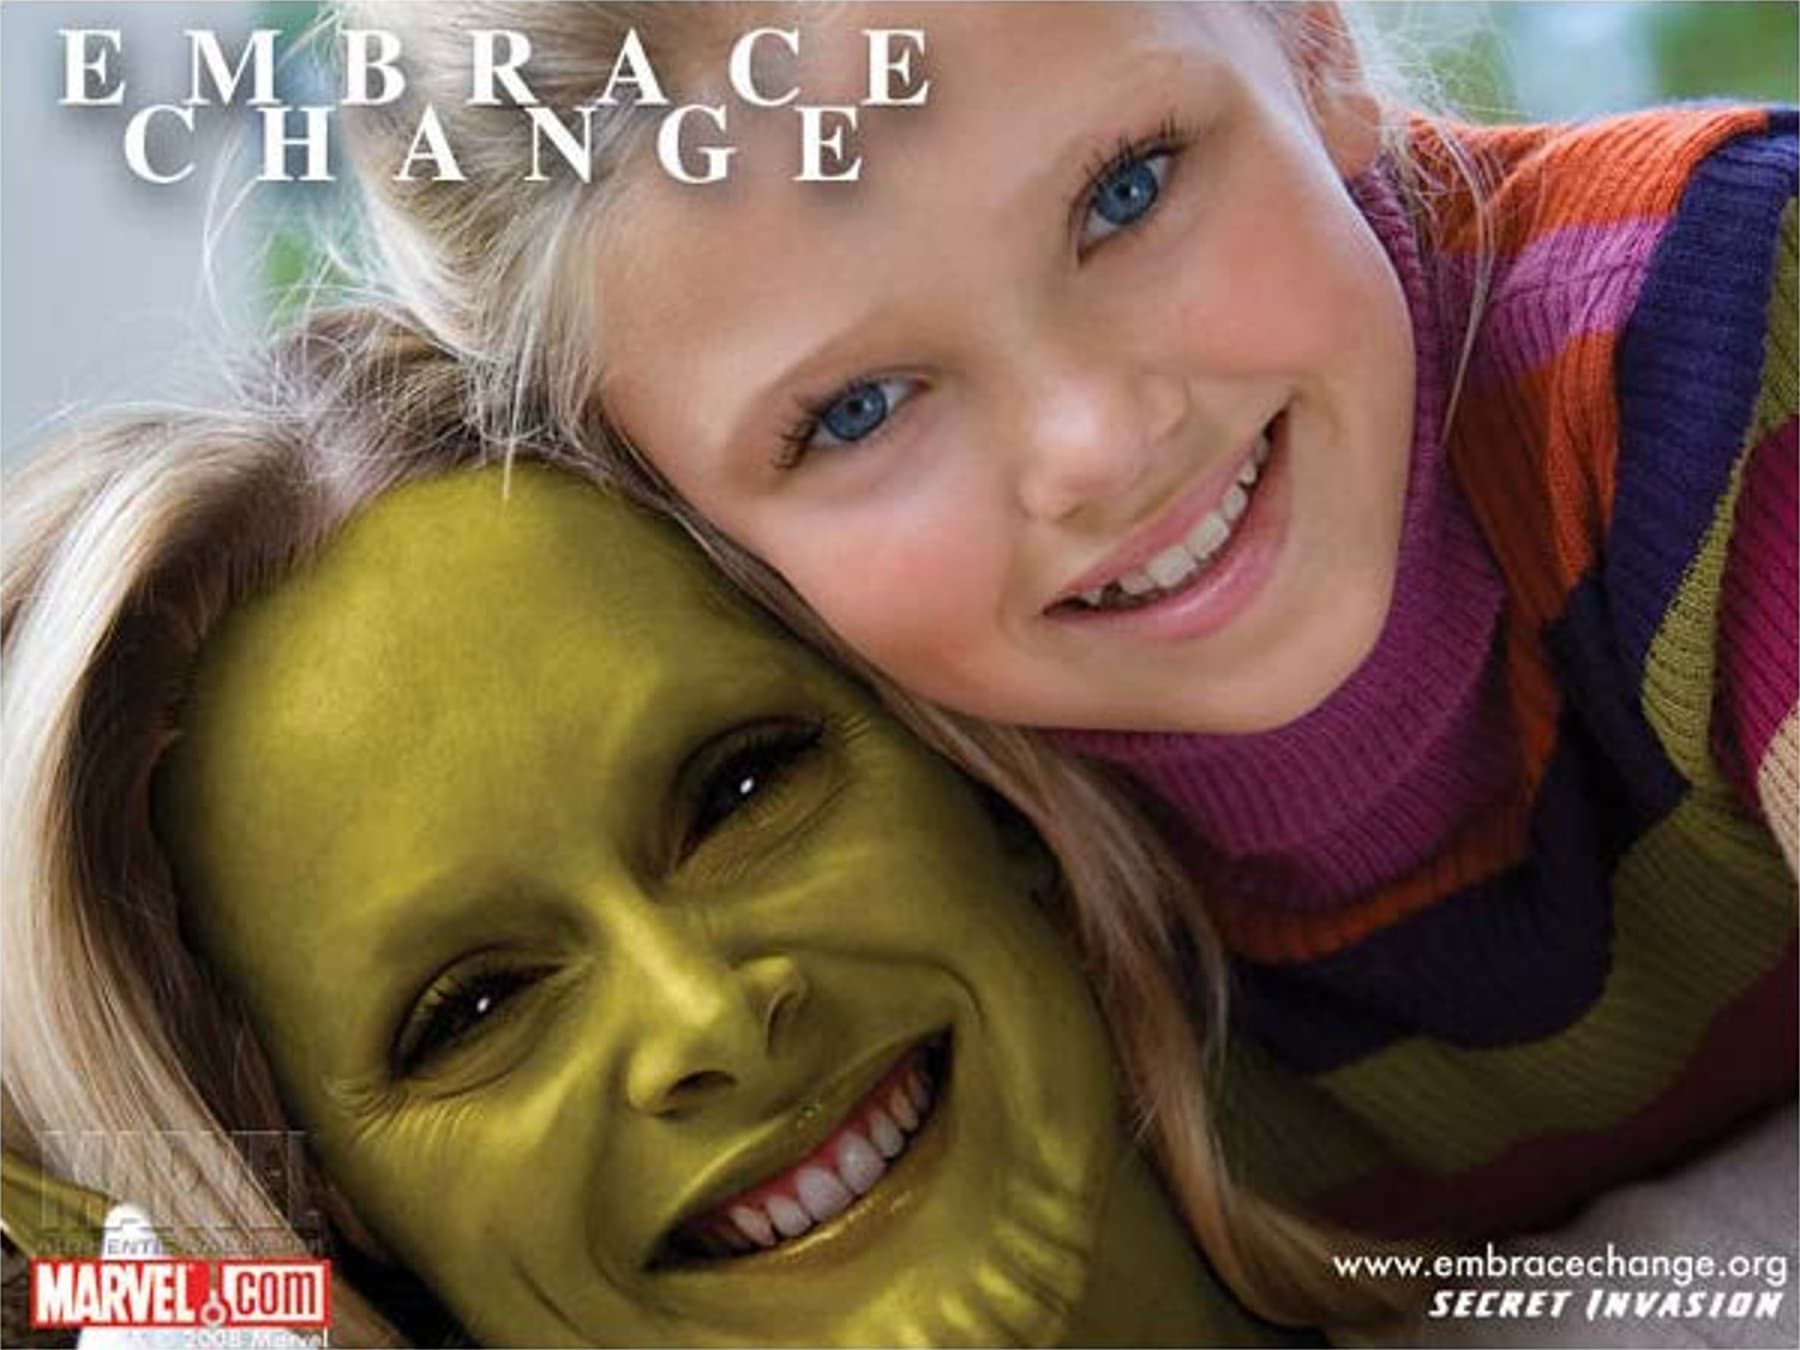 Embrace Change Stock Photo Promotional Image: Skrull Mother and Human Child